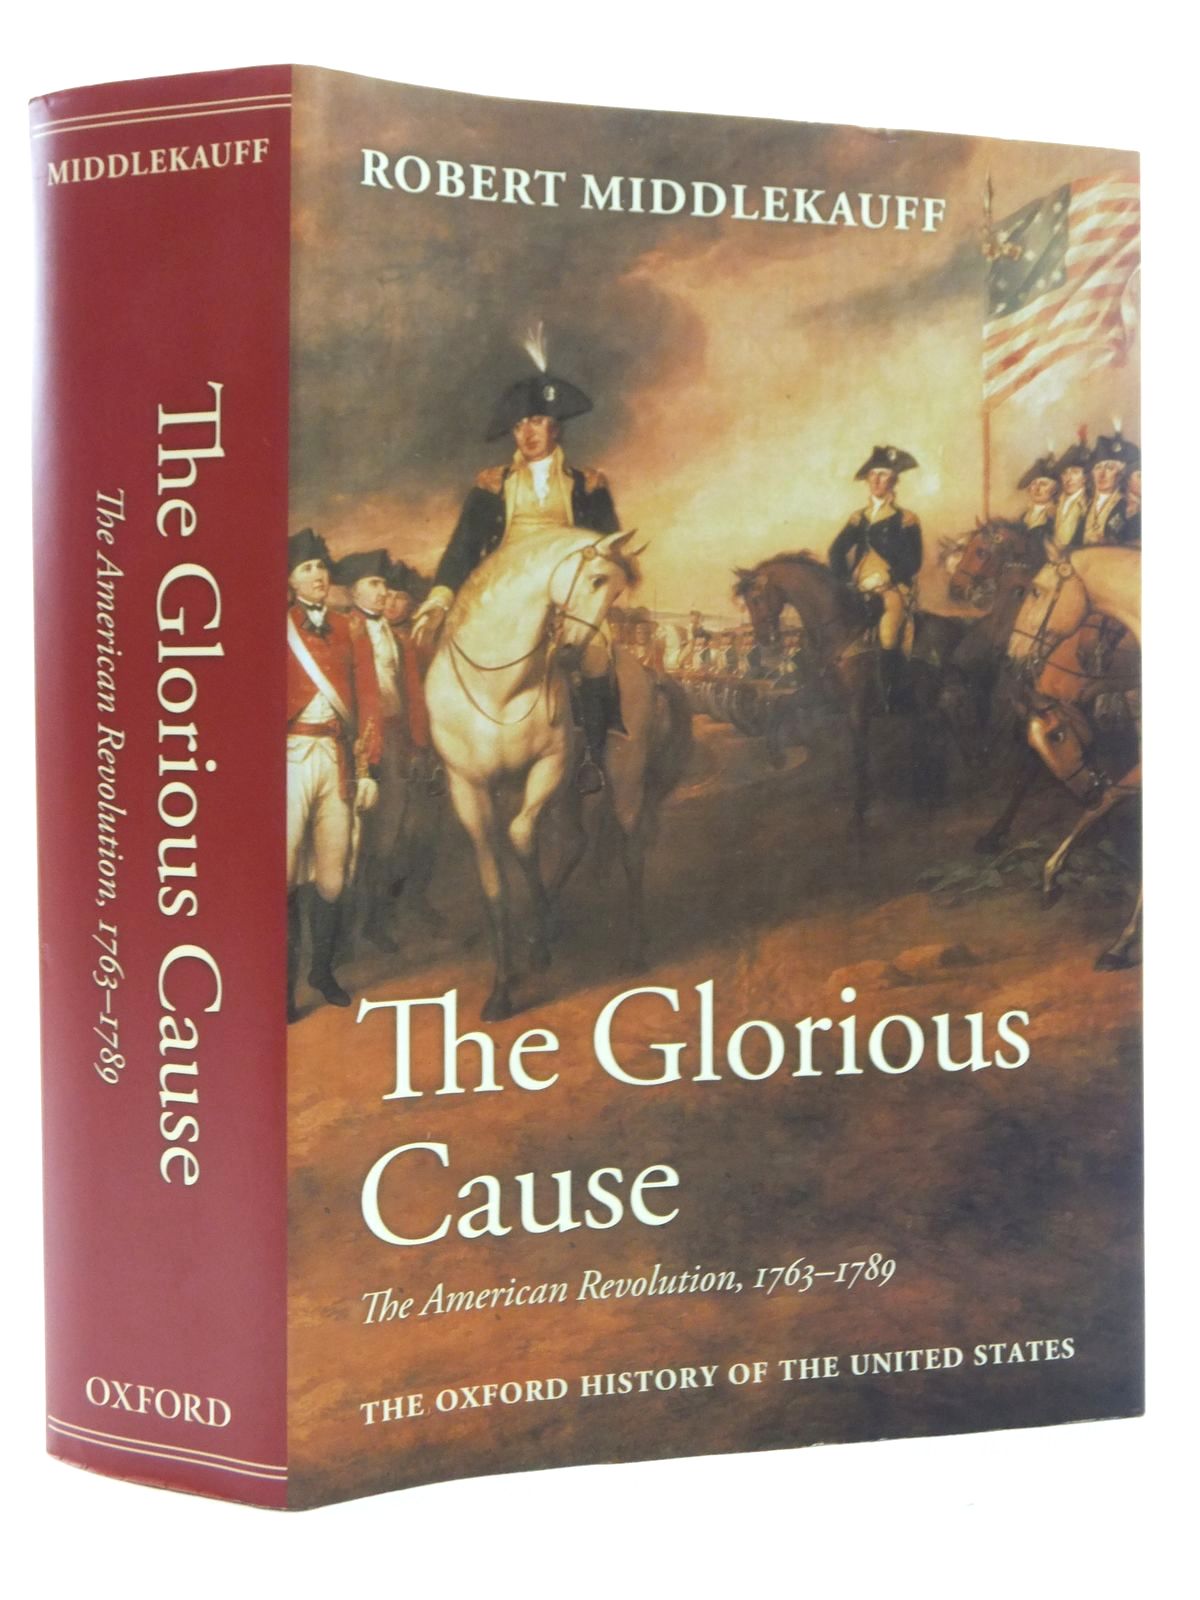 The Glorious Cause The American Revolution, 1763-1789